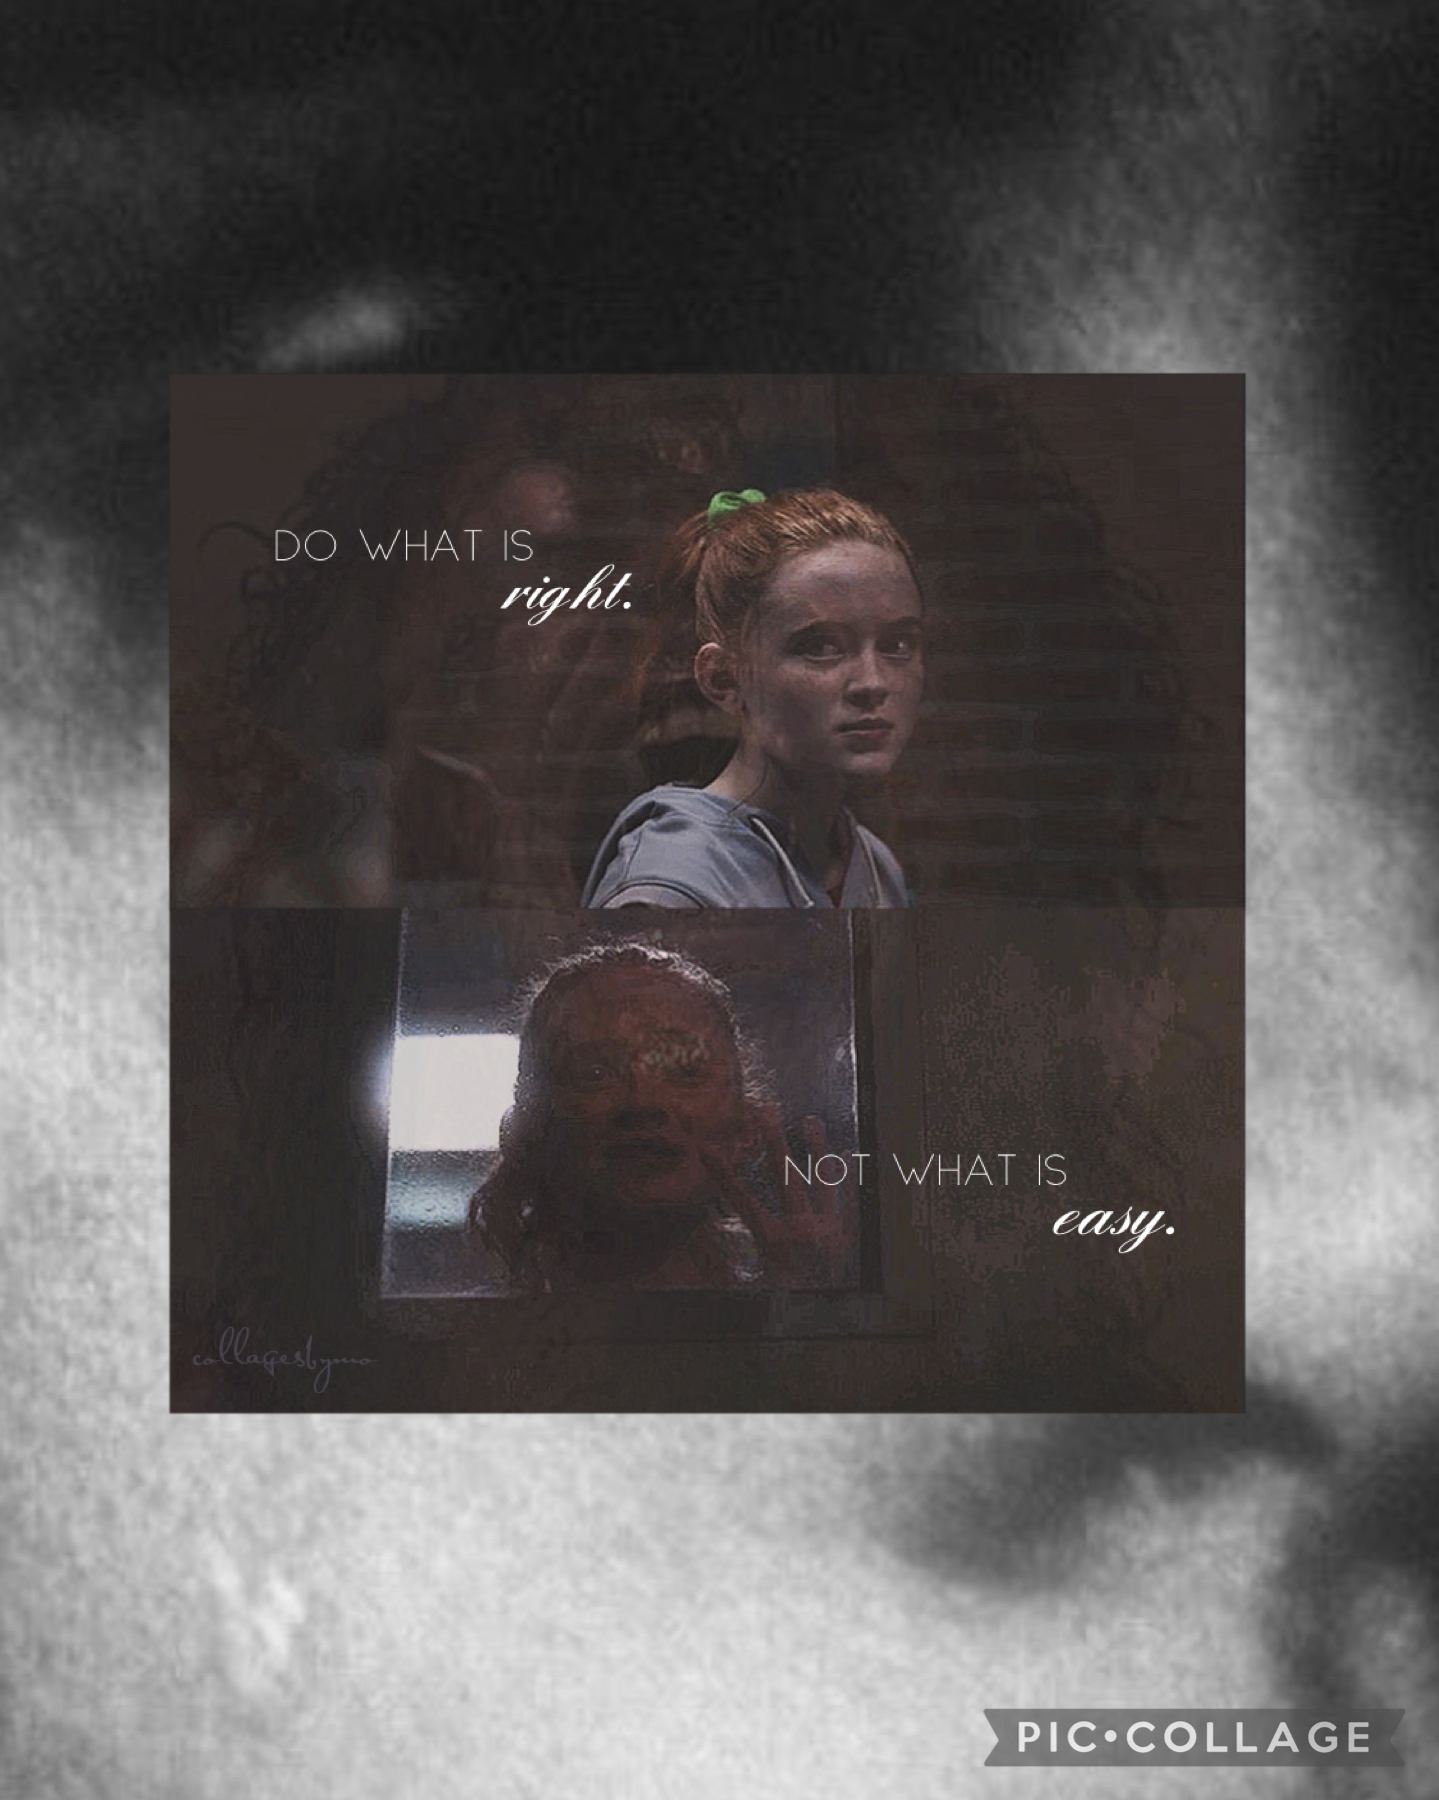 august 6th 22 (tap🥀) 
ugh stan max for staying strong my girl has been through too much | y’all can see billy in the bg right💀i tried to make it obv to see yet not too obv so it didn’t cover up max too much 😭 qotd: fav tv show? ❤️‍🩹 love u